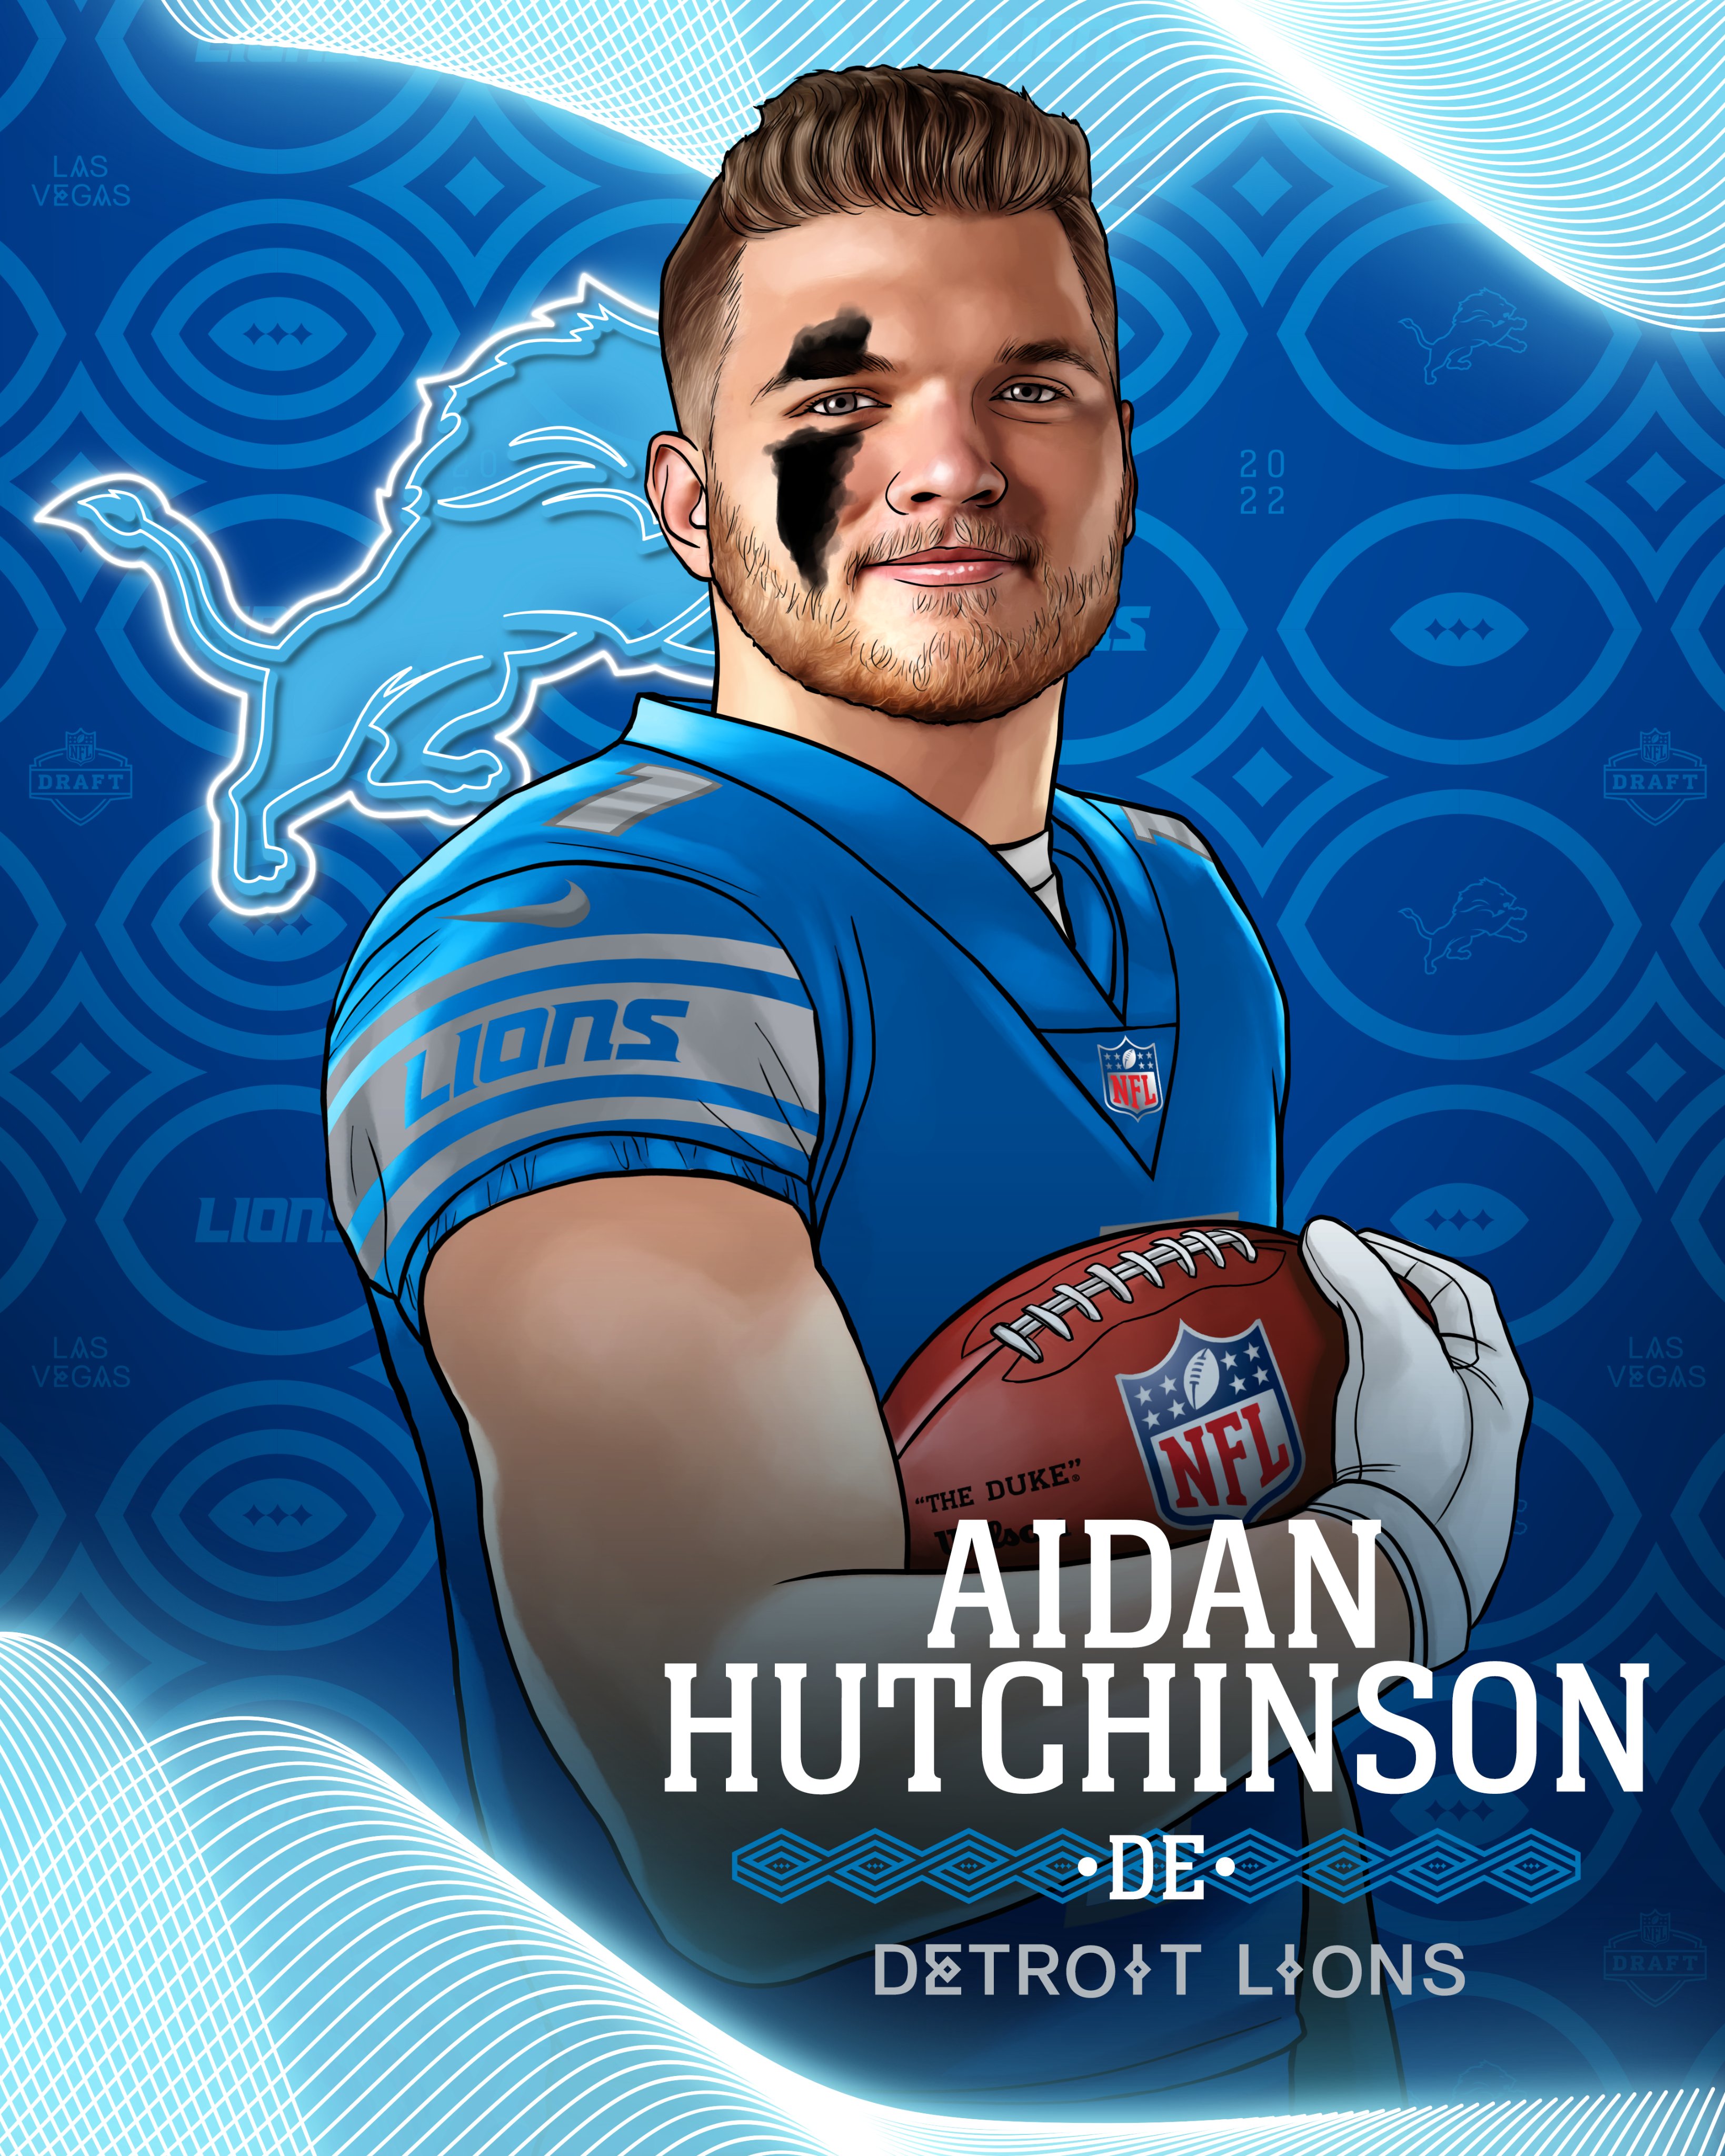 NFL in his home state. Aidan Hutchinson goes No. 2 to the